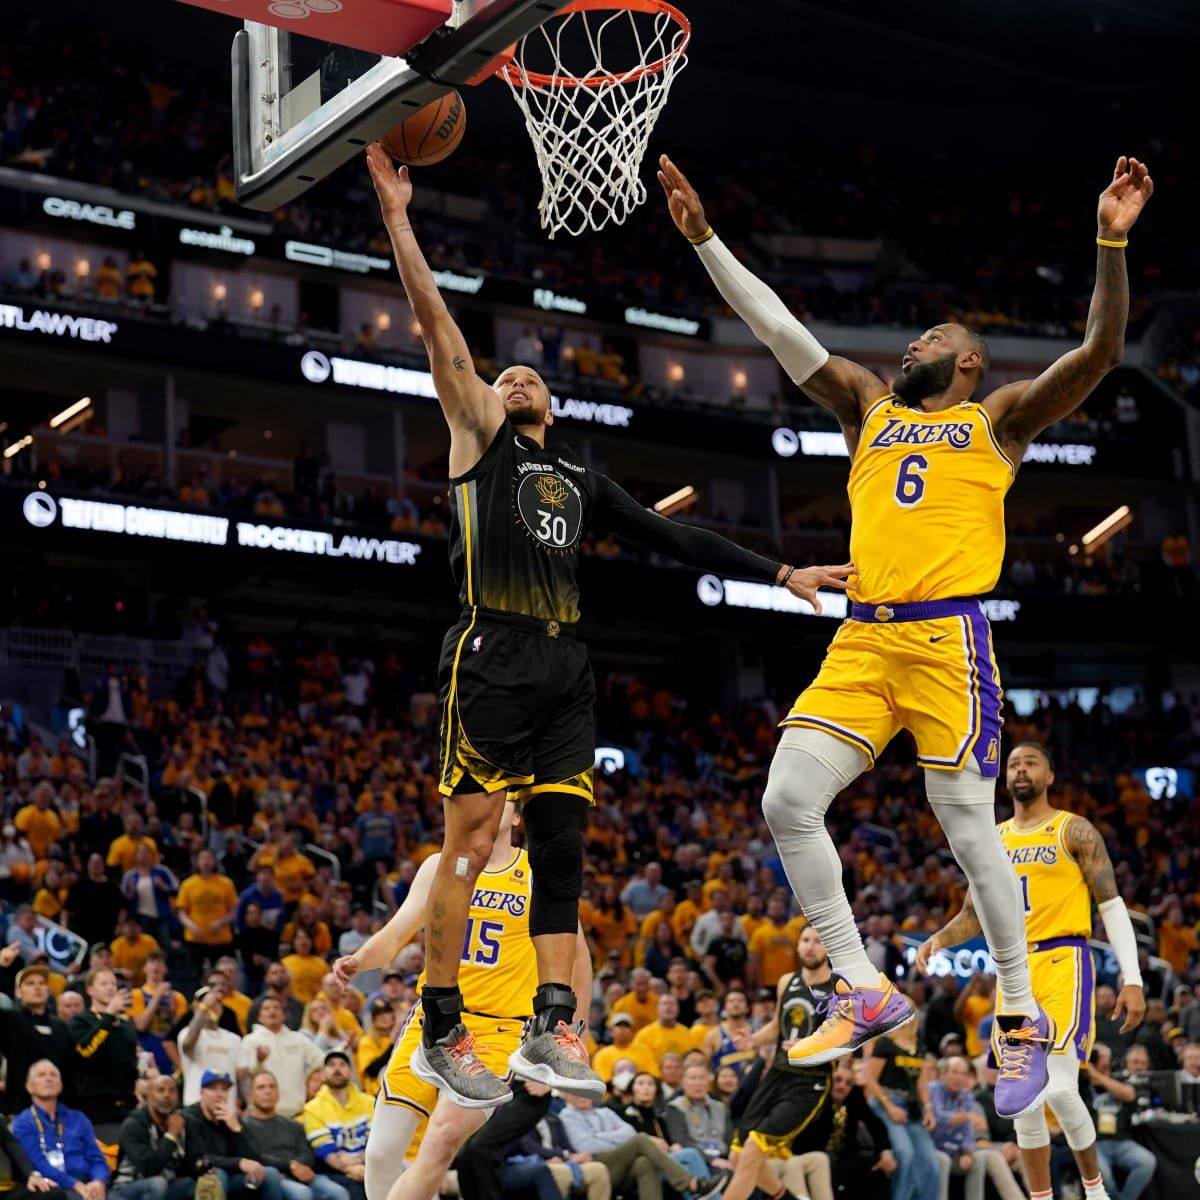 Lakers Warriors Series Could Change How Expert Ranks LeBron James, Stephen Curry Lakers. News, Rumors, Videos, Schedule, Roster, Salaries And More